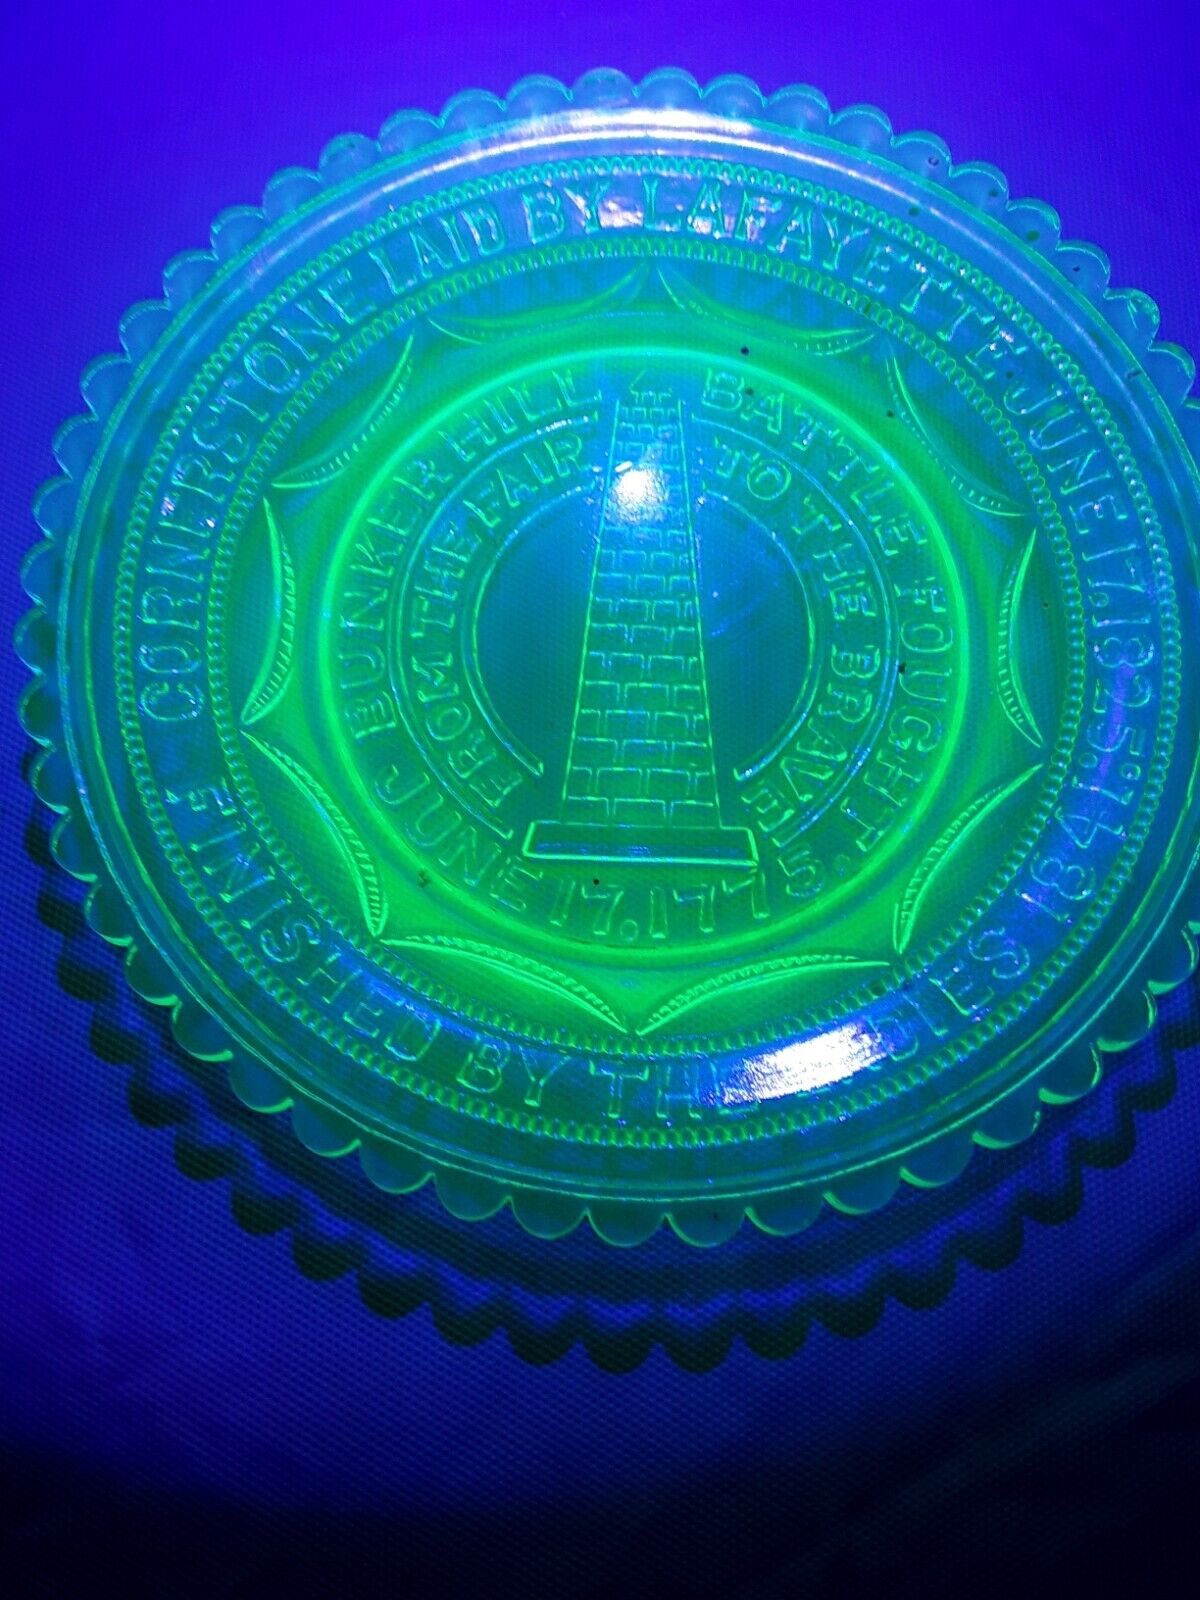 Uranium Glass 3.5 In Plate Bunker Hill Battle Fought June 17 1775 Finished 1841 